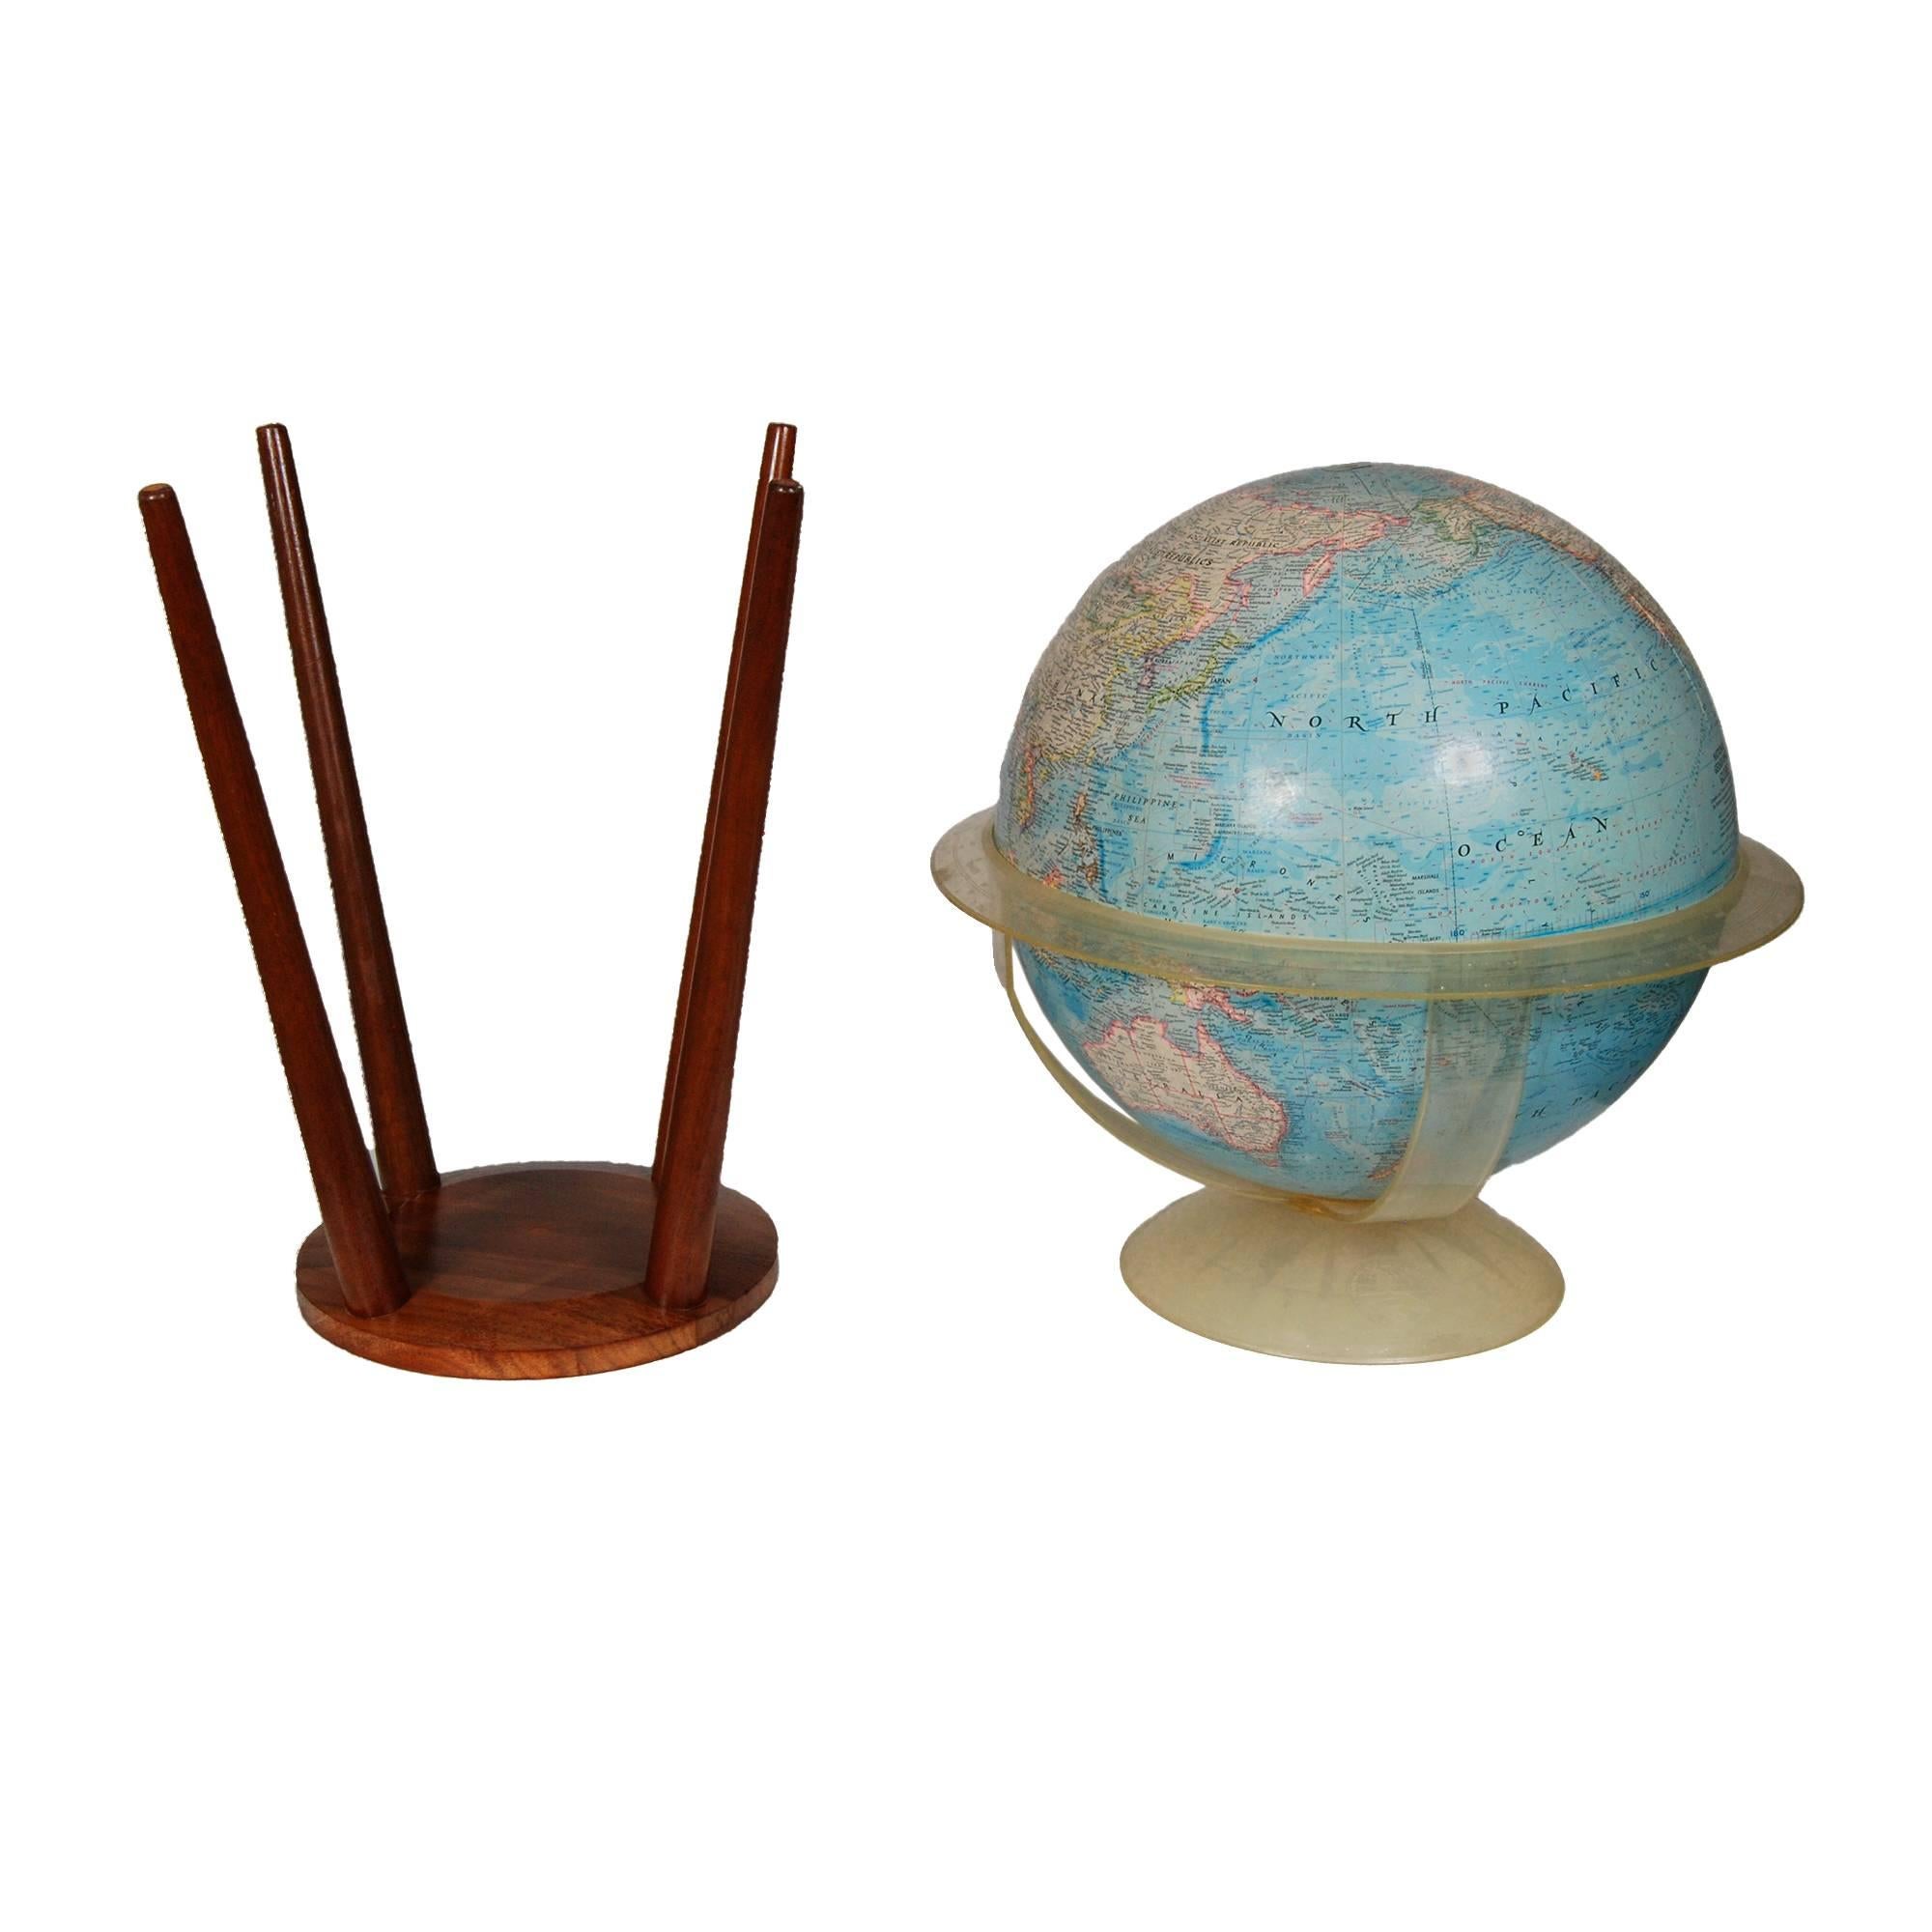 Vintage National Geographic floor globe on a walnut stand. The globe sits in an acrylic holder and measures distance. Base is a spider-leg walnut stand with a groove to hold the acrylic holder in place. Marked.